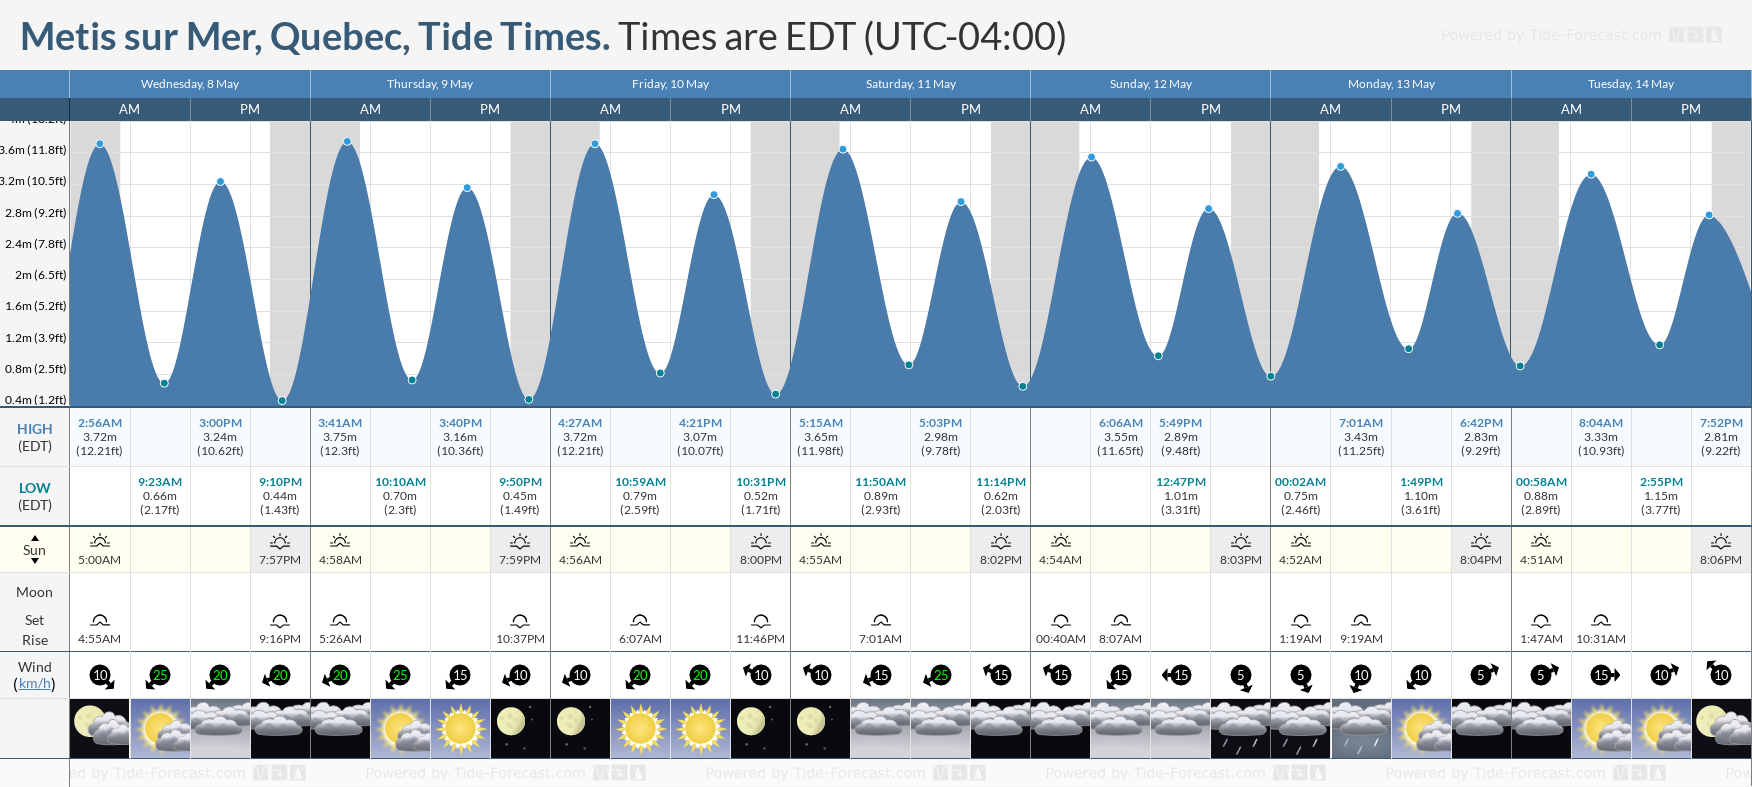 Metis sur Mer, Quebec Tide Chart including high and low tide tide times for the next 7 days